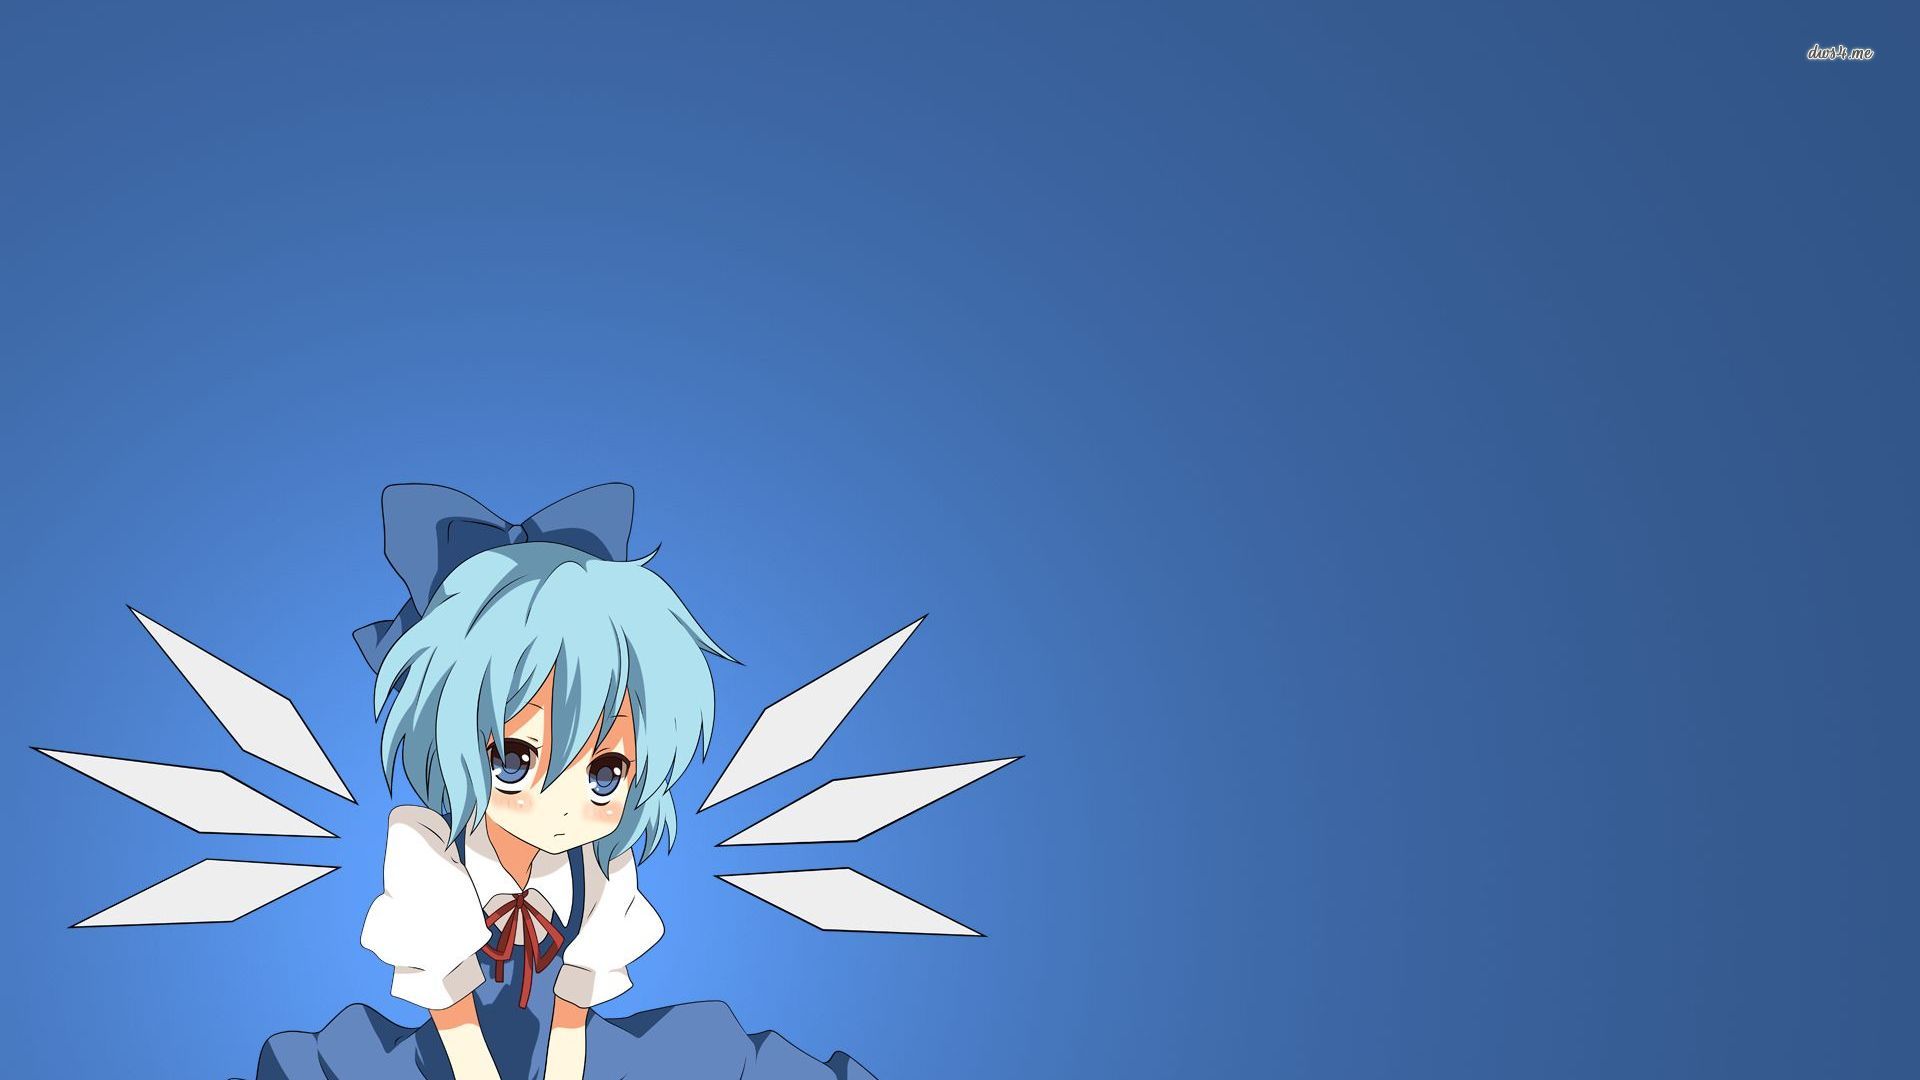 Cirno - Touhou Project wallpaper - Anime wallpapers - #23236